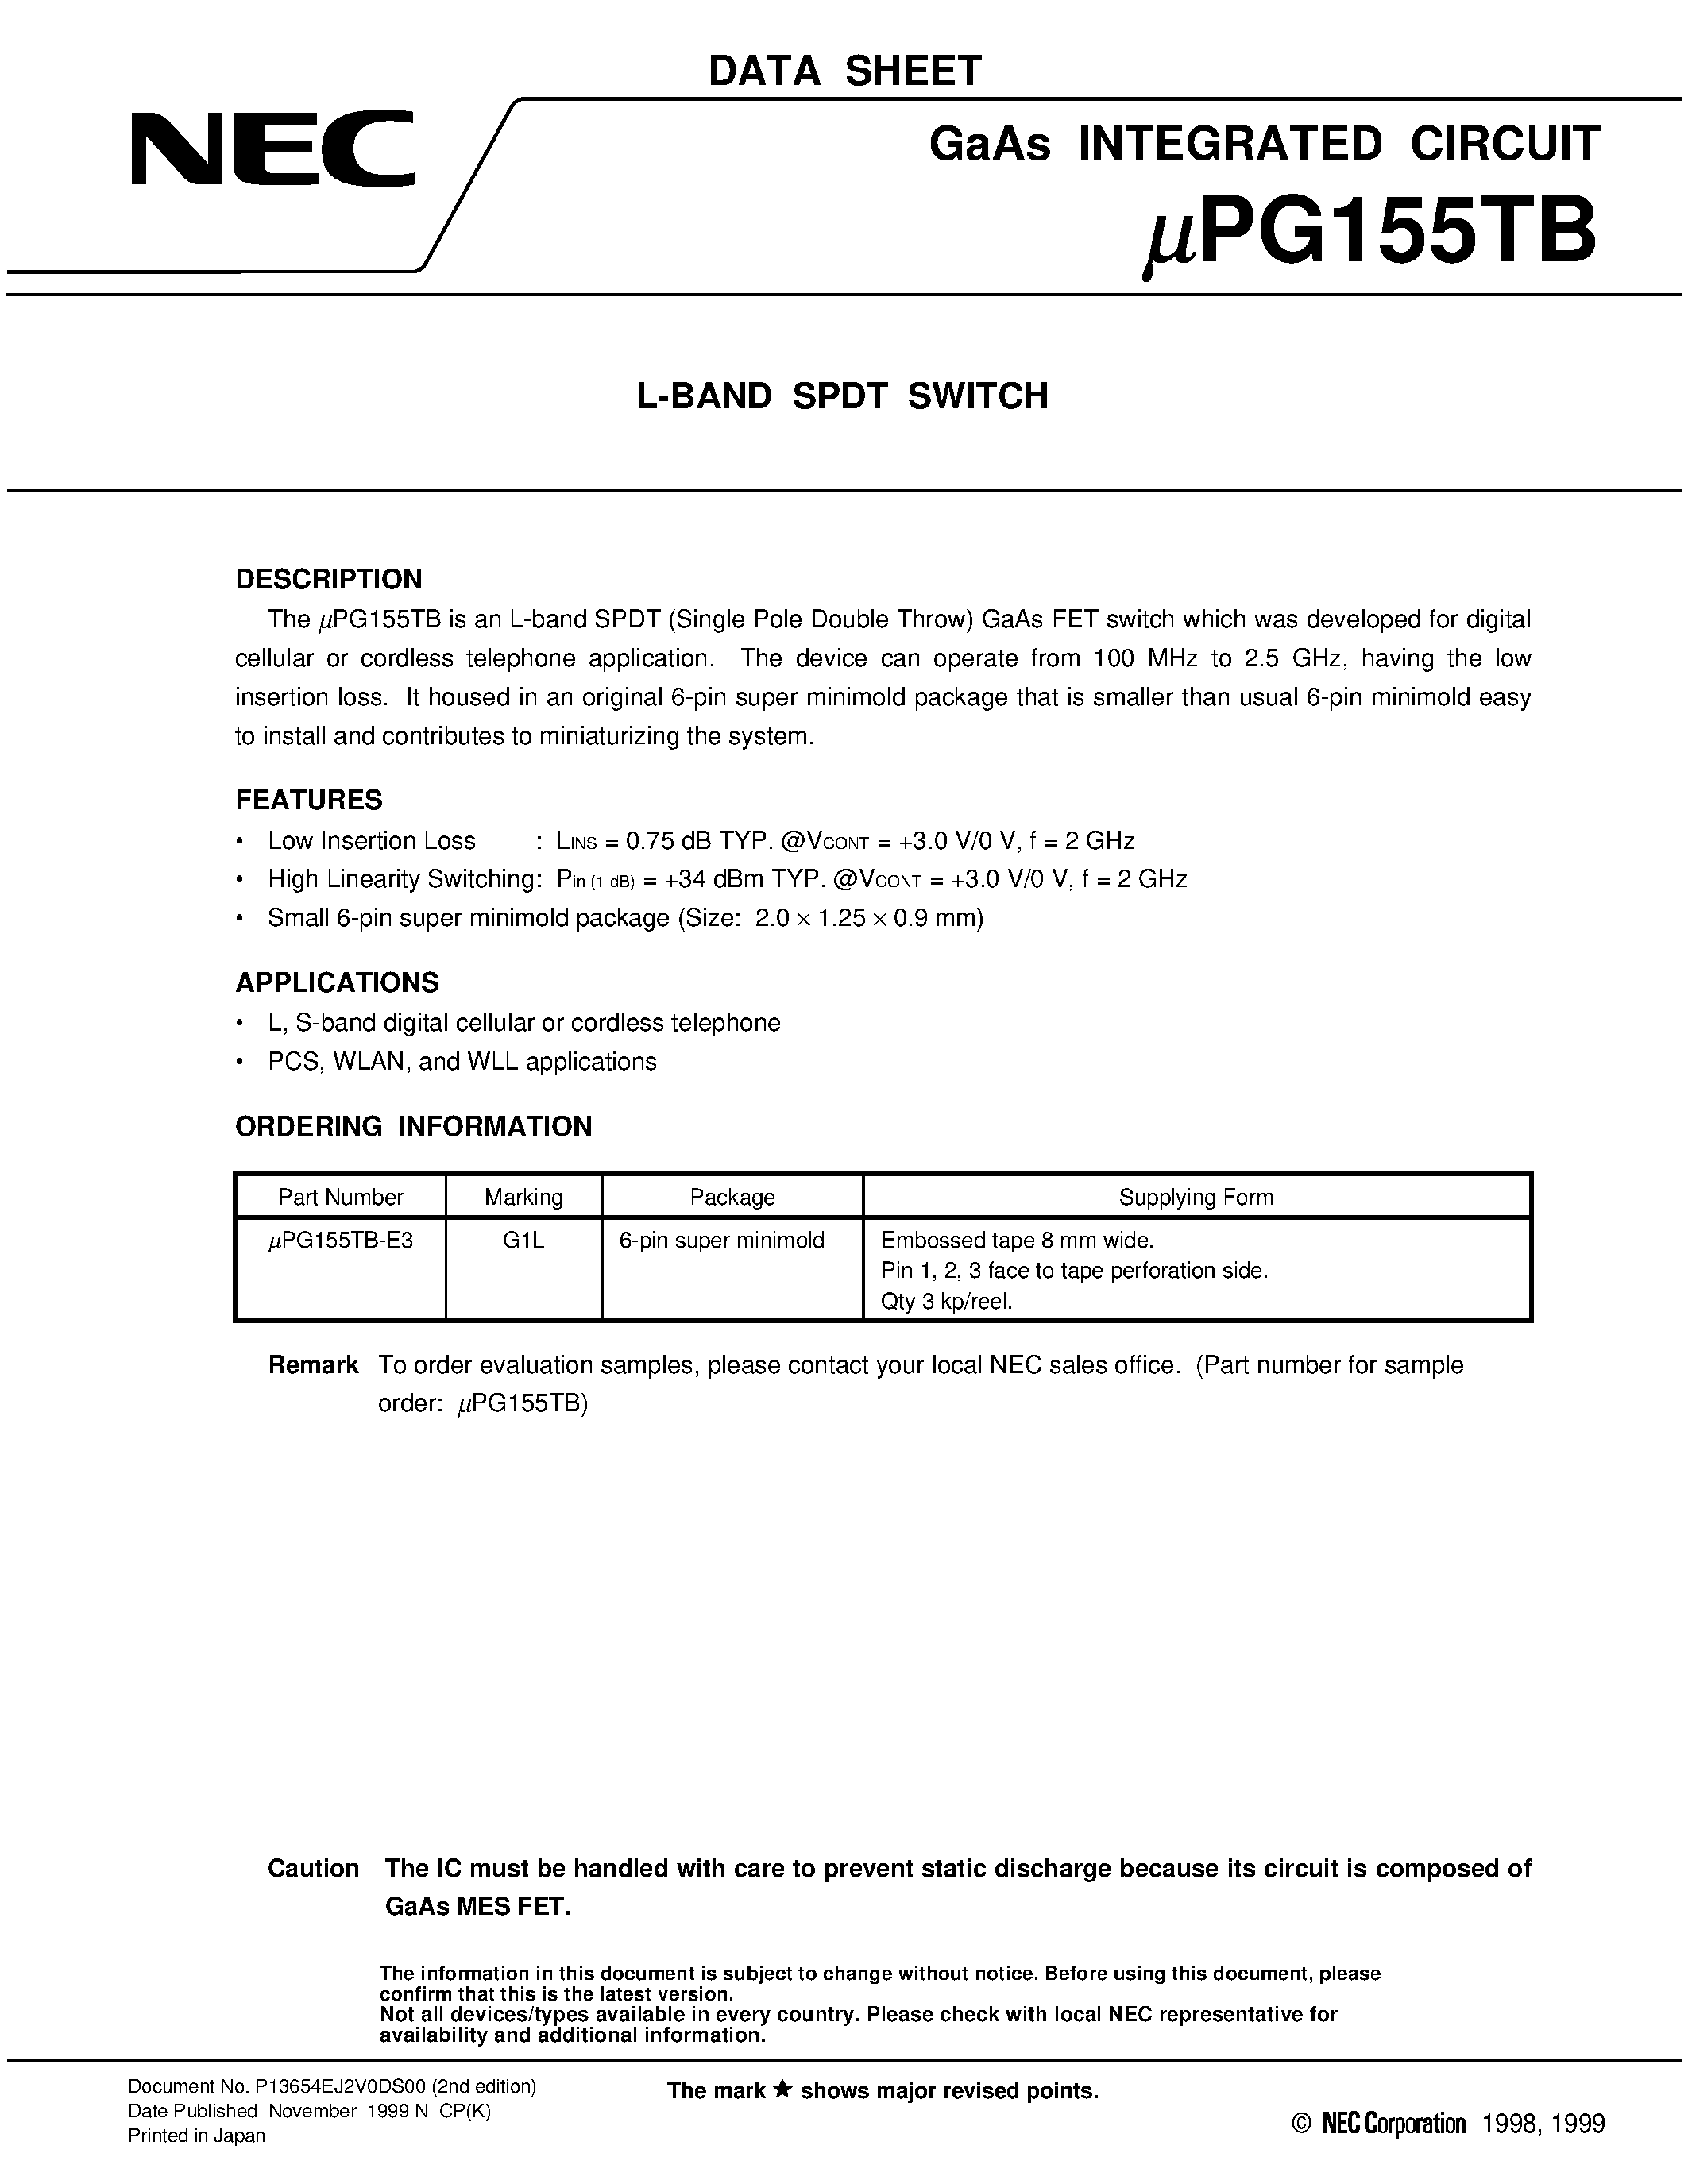 Datasheet UPG155TB-E3 - L-BAND SPDT SWITCH page 1